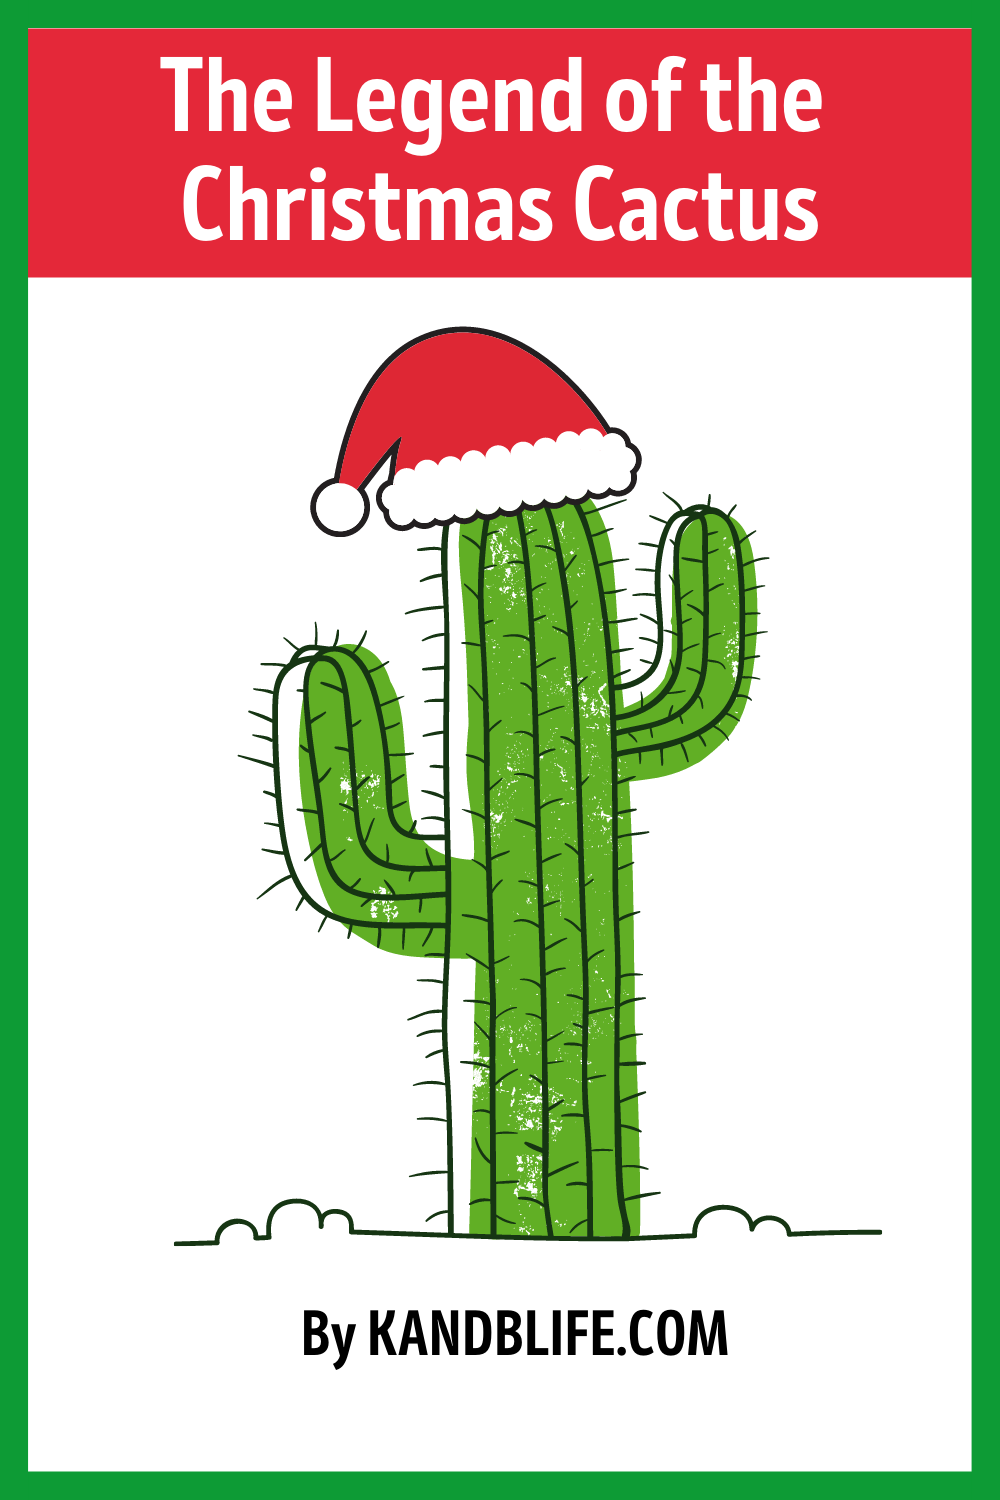 A cactus with a Santa hat for the Christmas story, The Legend of the Christmas Cactus.